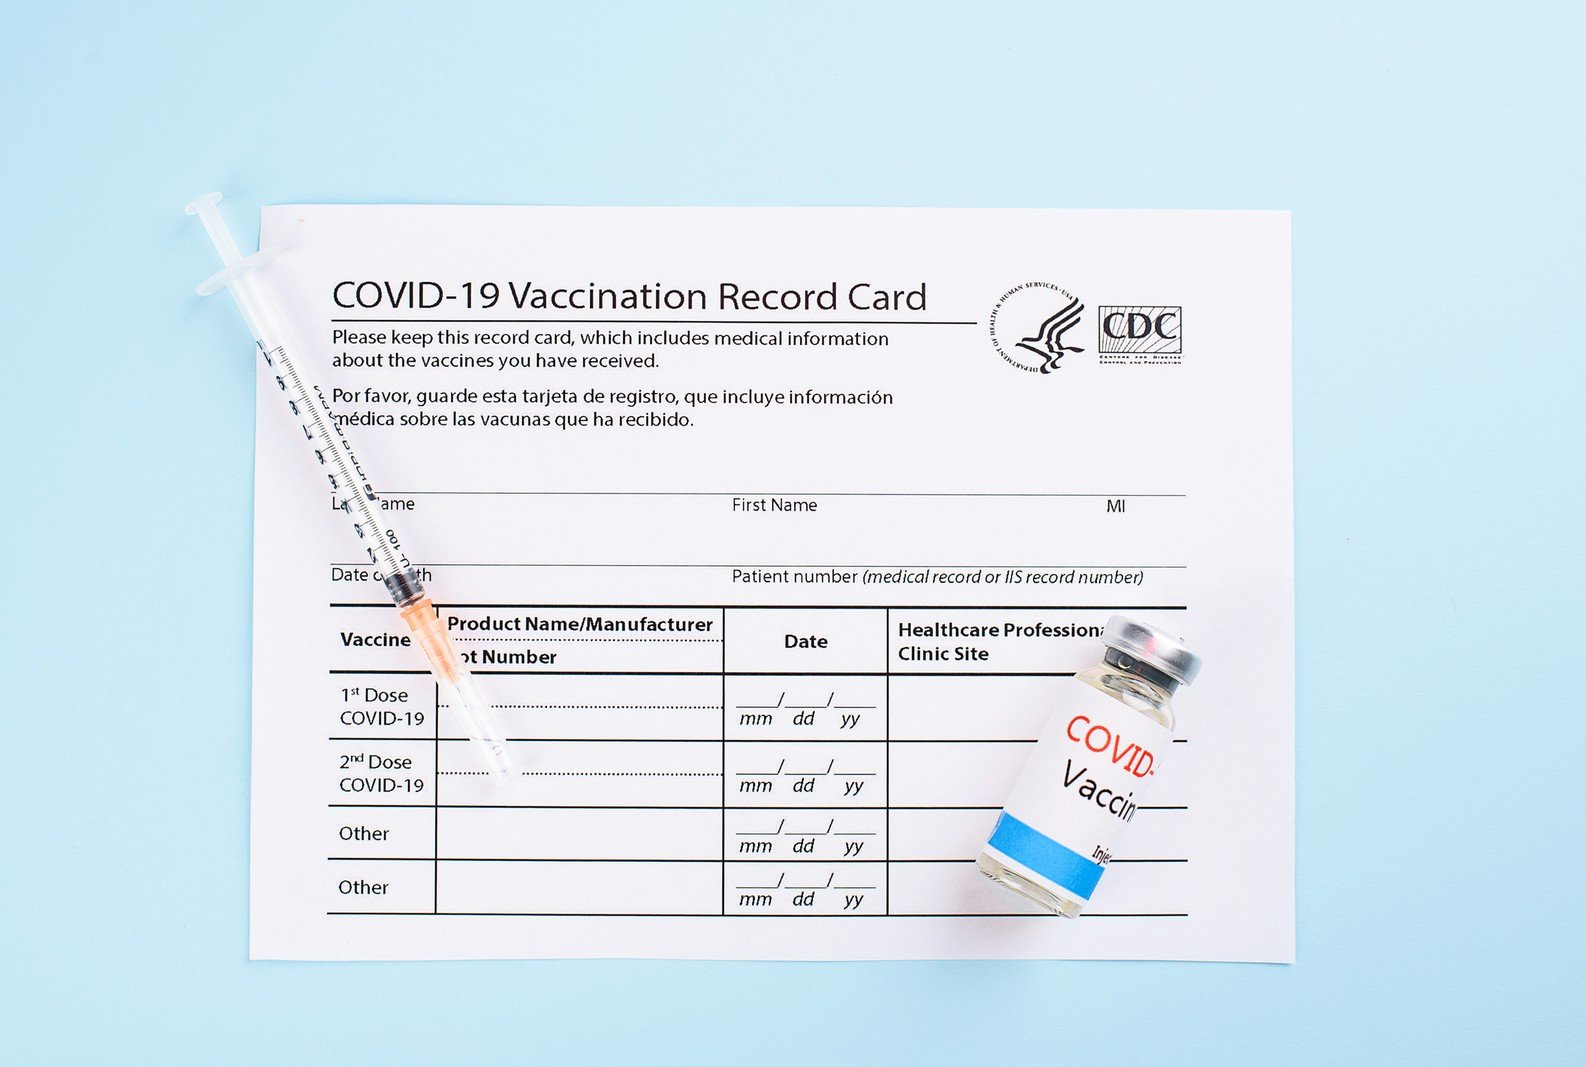 Royal Caribbean changes Covid-19 vaccine requirements for cruise ships | Royal Caribbean Blog